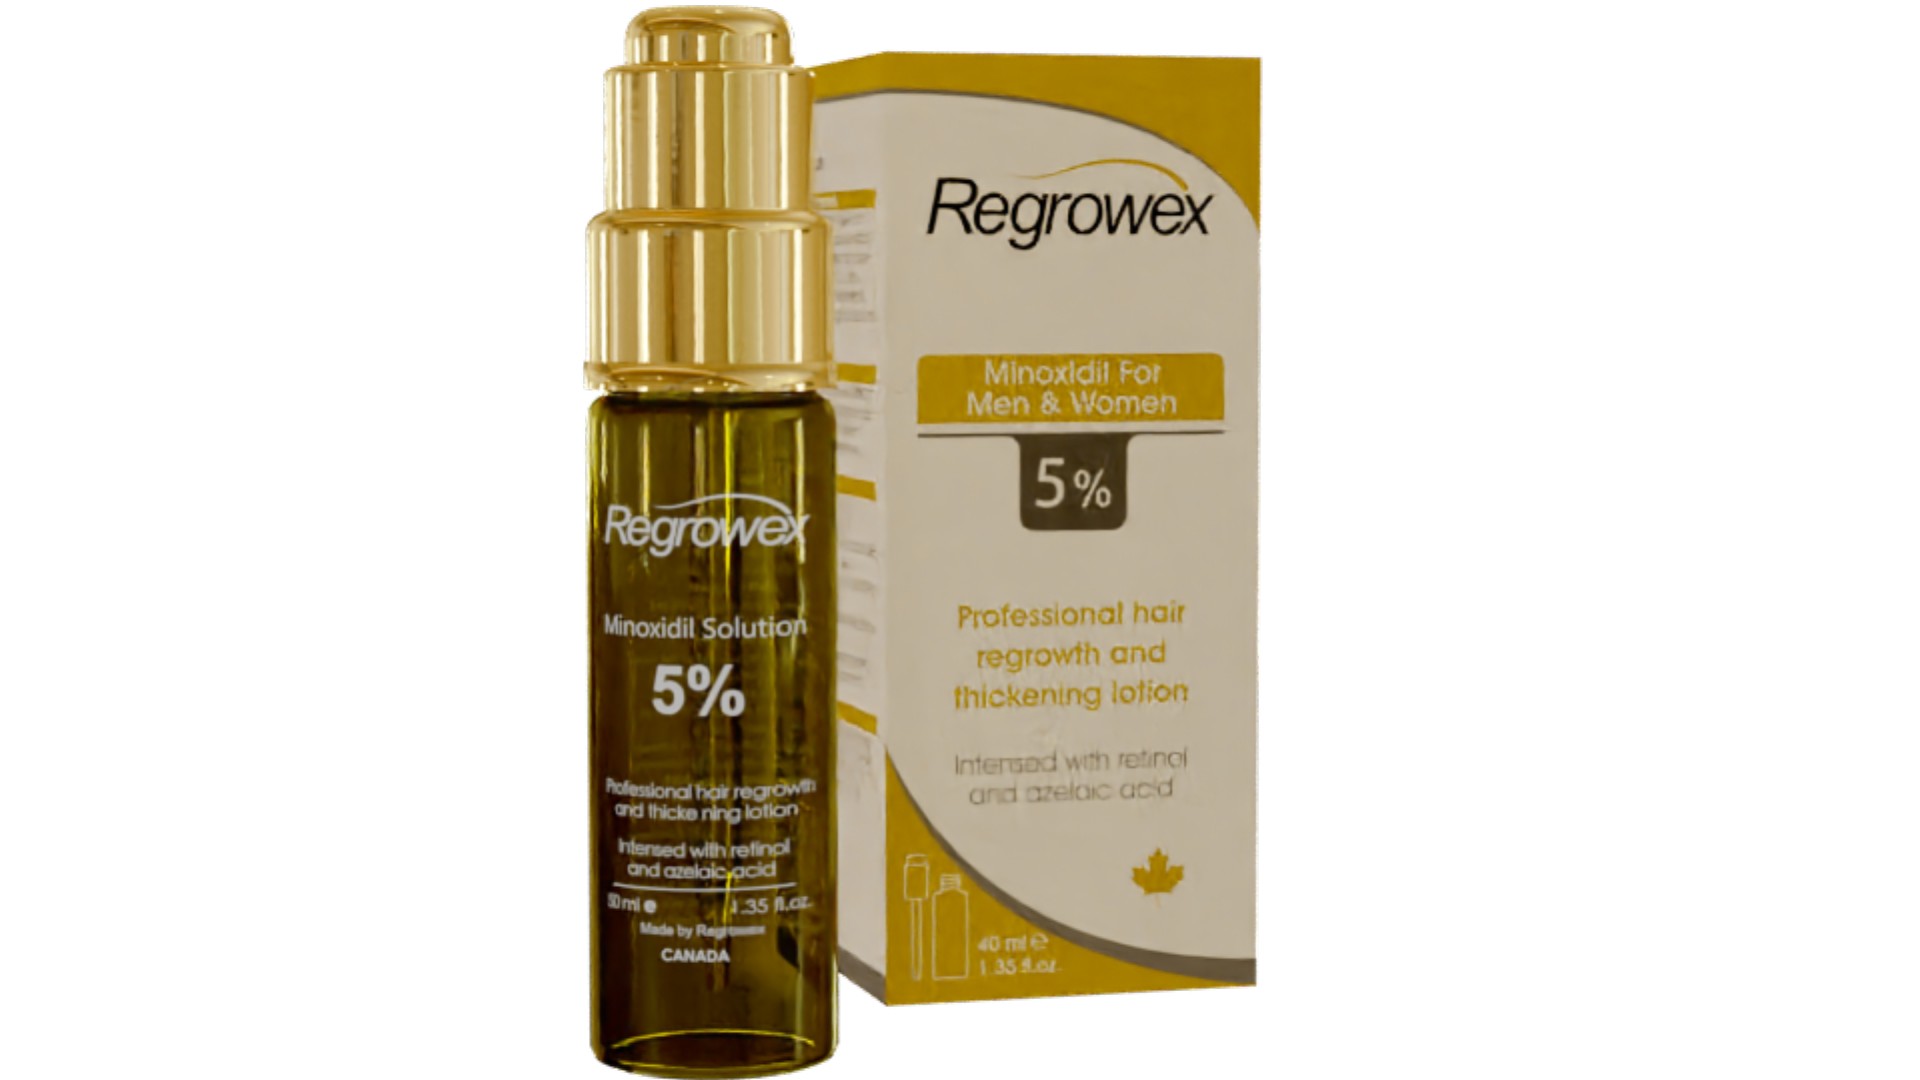 regrowex minoxidil solution 5% bottle with box